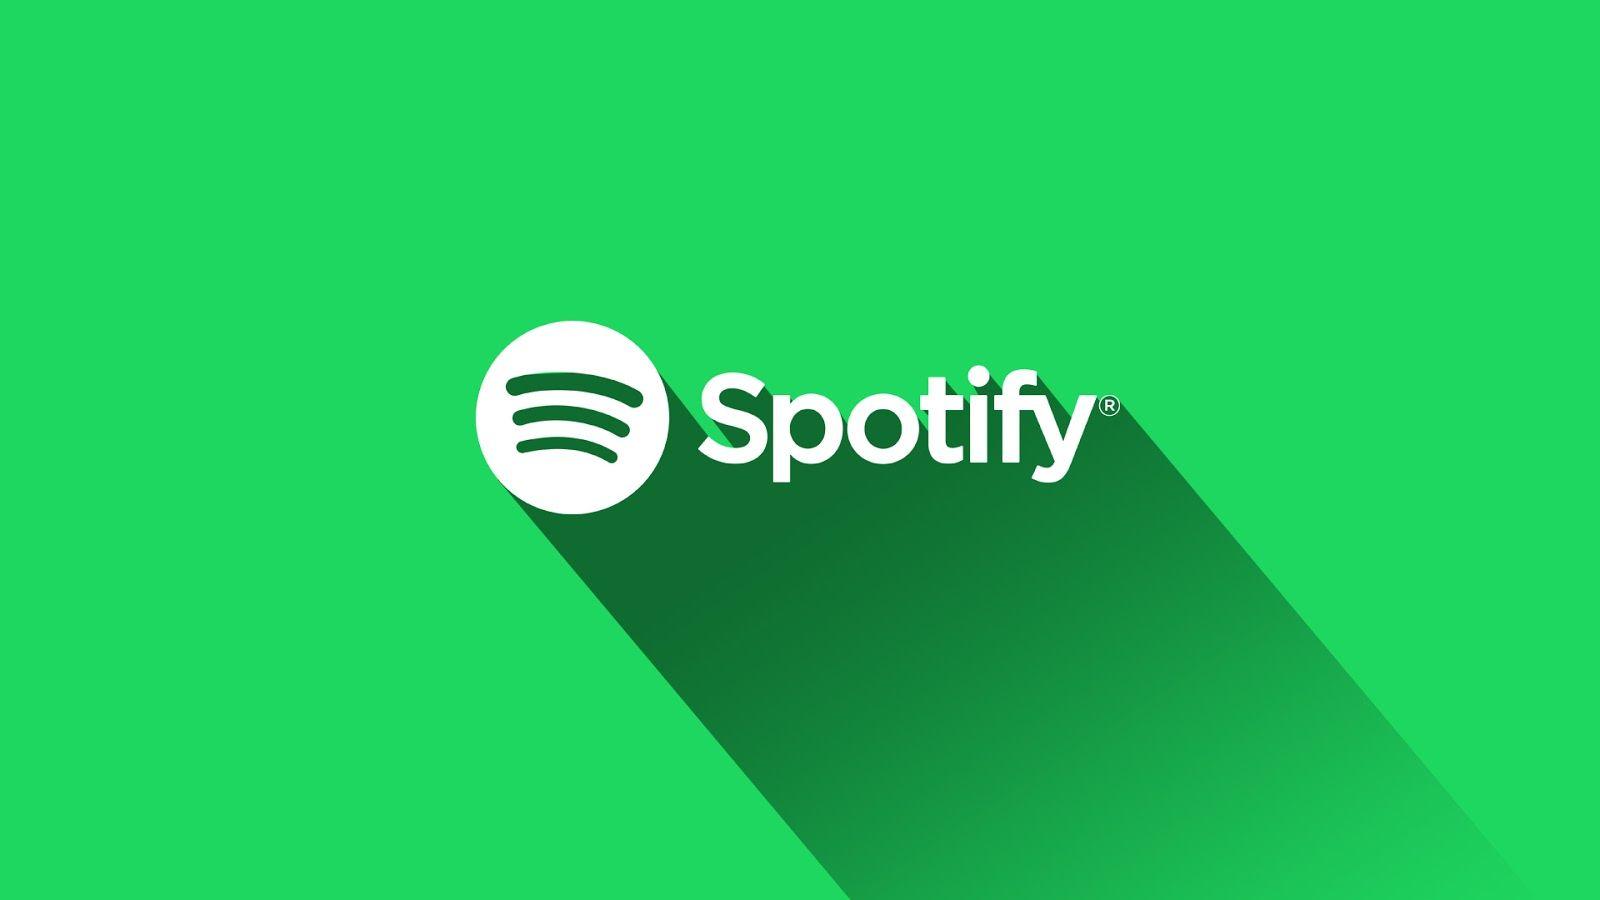 21+ Spotify wallpapers and backgrounds available for download for free